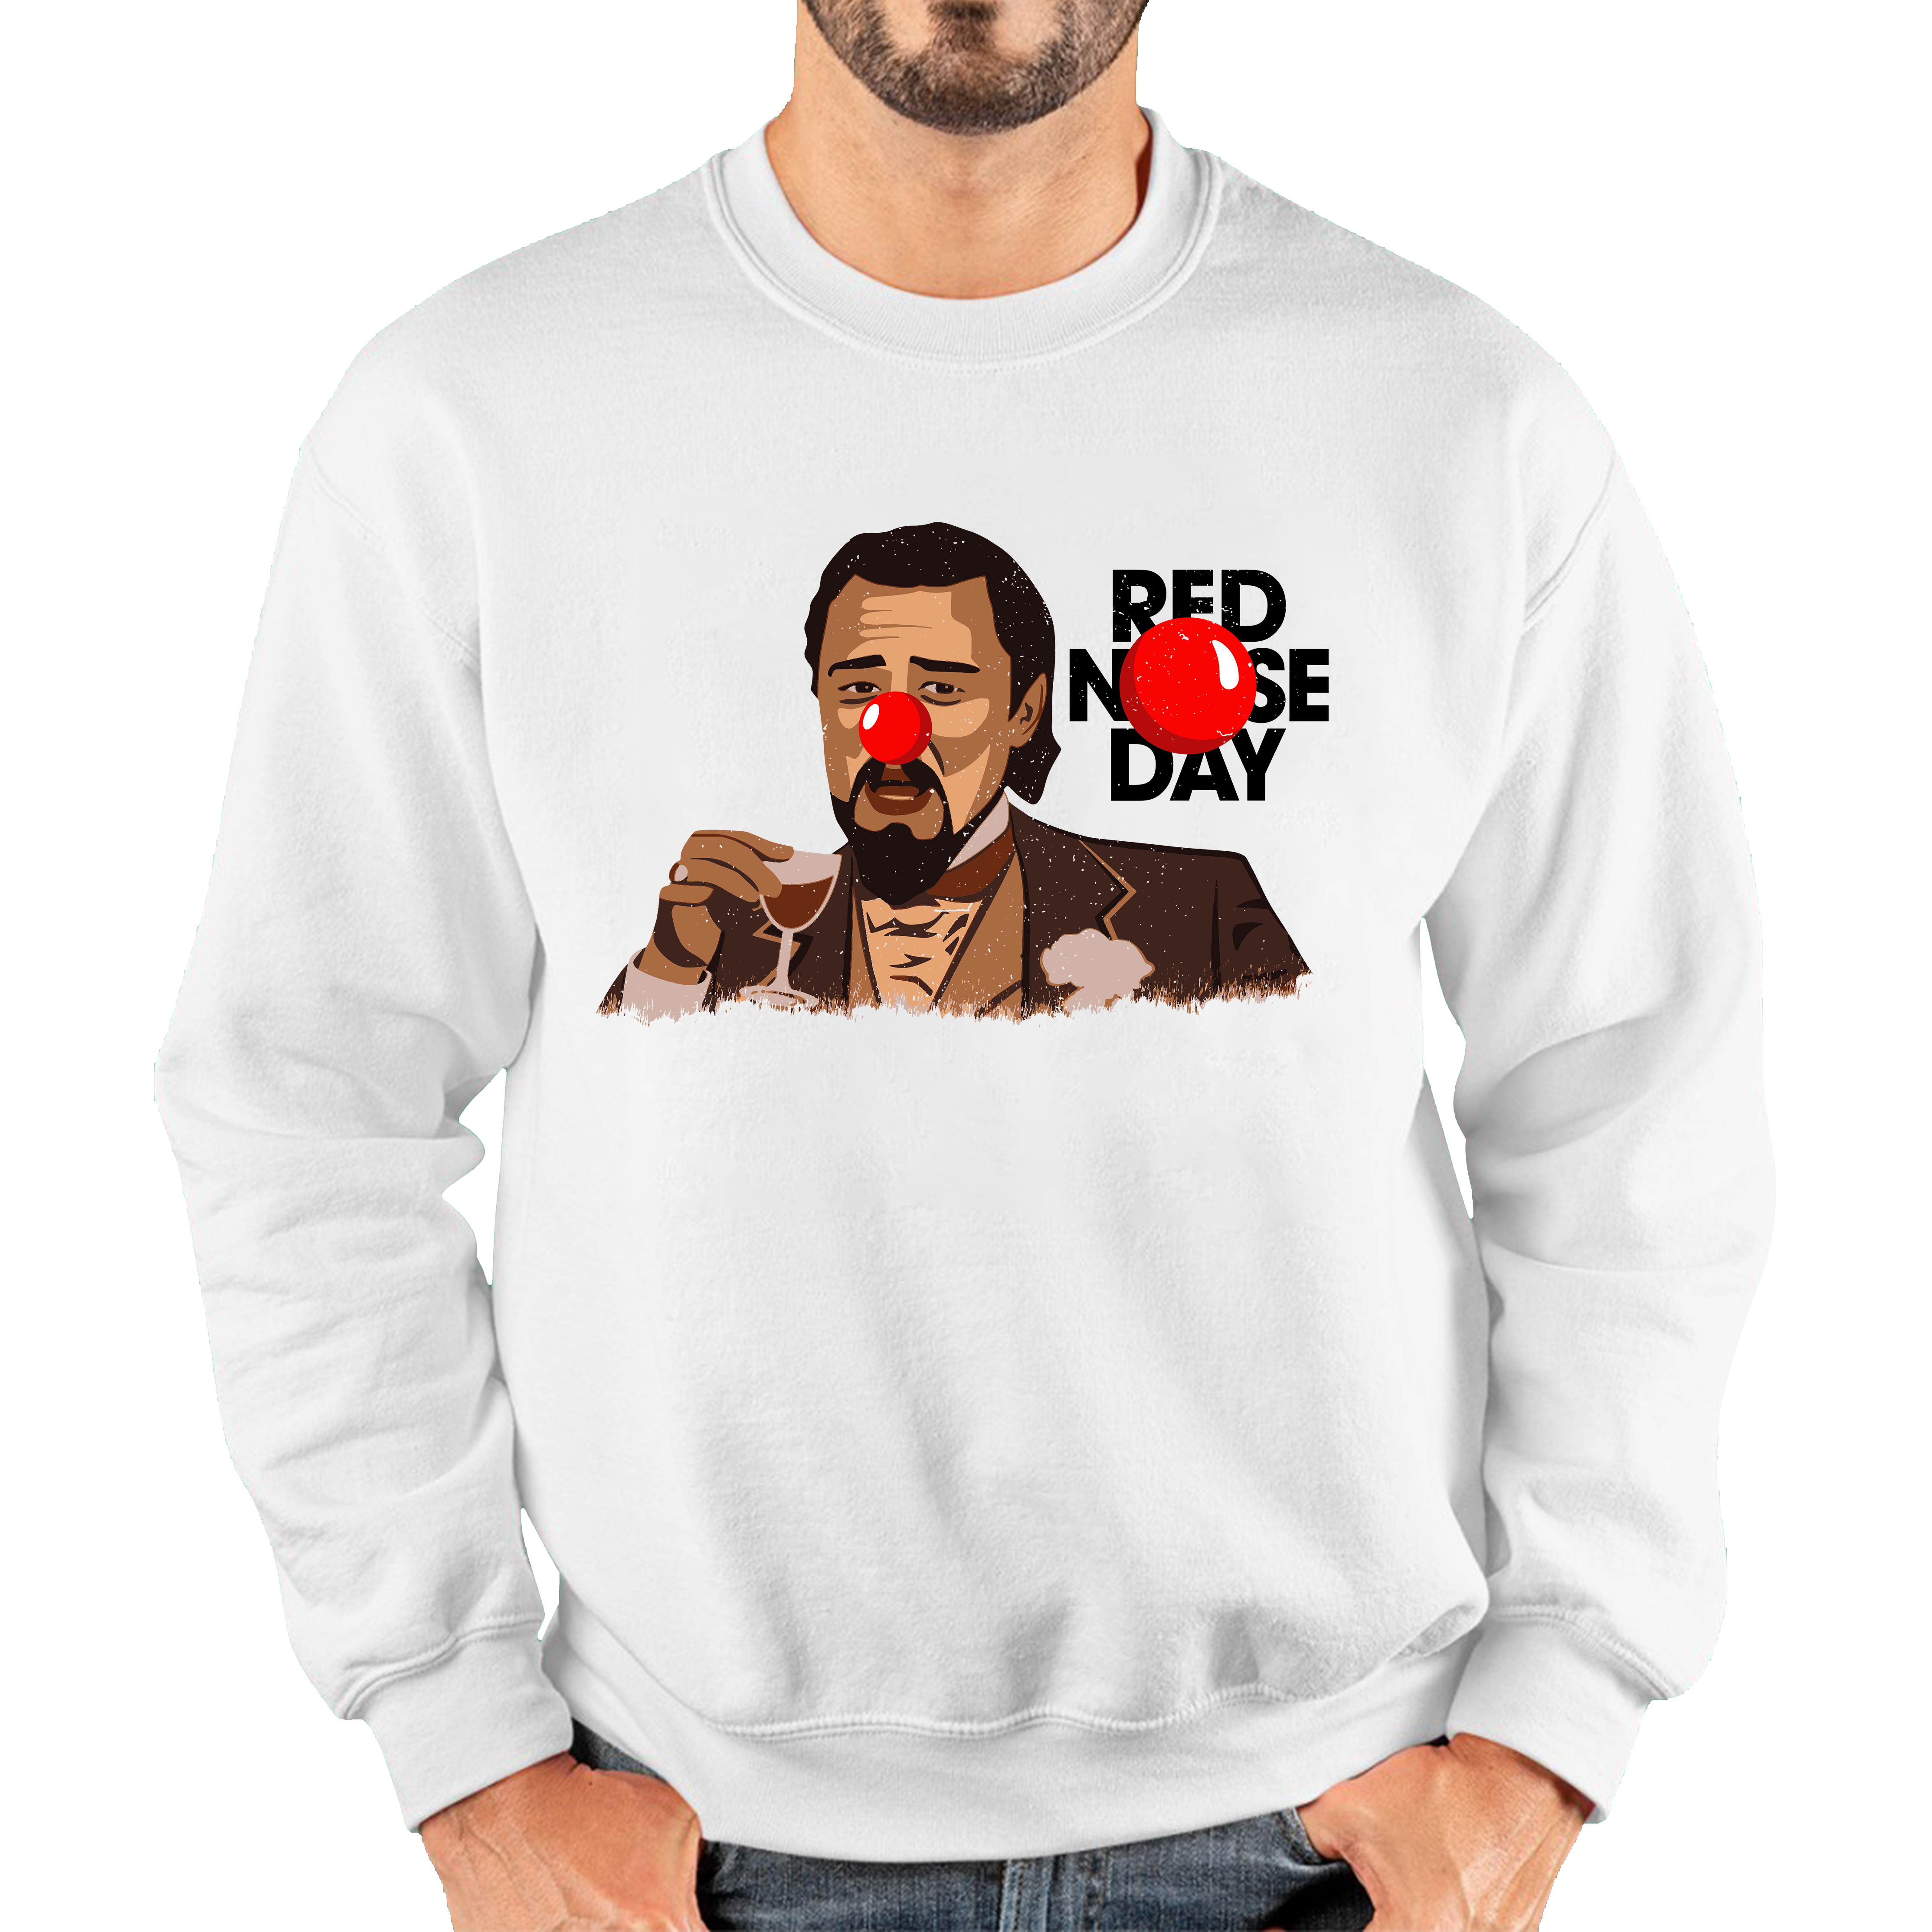 Leonardo Dicaprio Laughing Meme Red Nose Day Adult Sweatshirt. 50% Goes To Charity